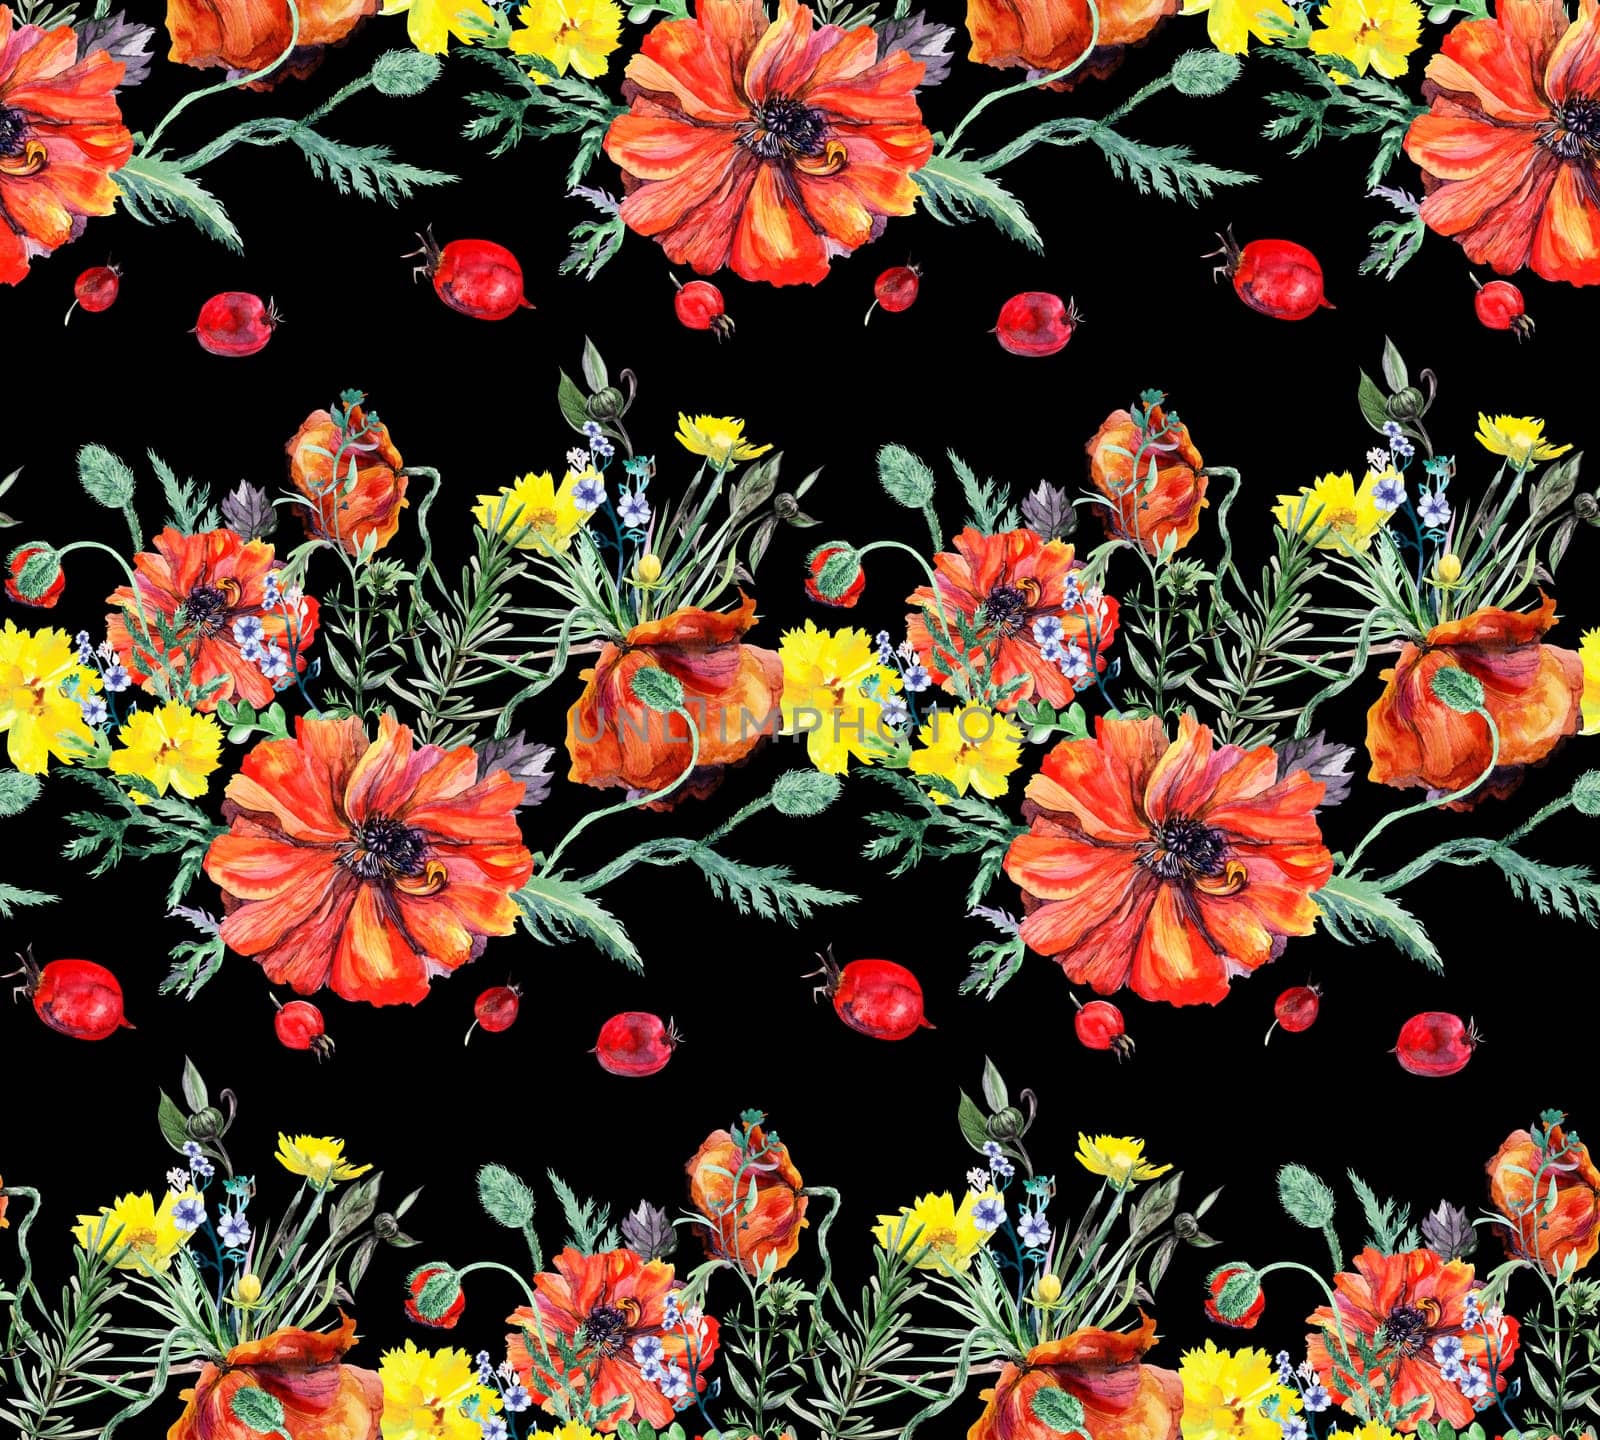 Horizontal pattern with graceful red poppies in wildflowers and scattered hawthorn on a black background painted in watercolor for textiles and home retro decor